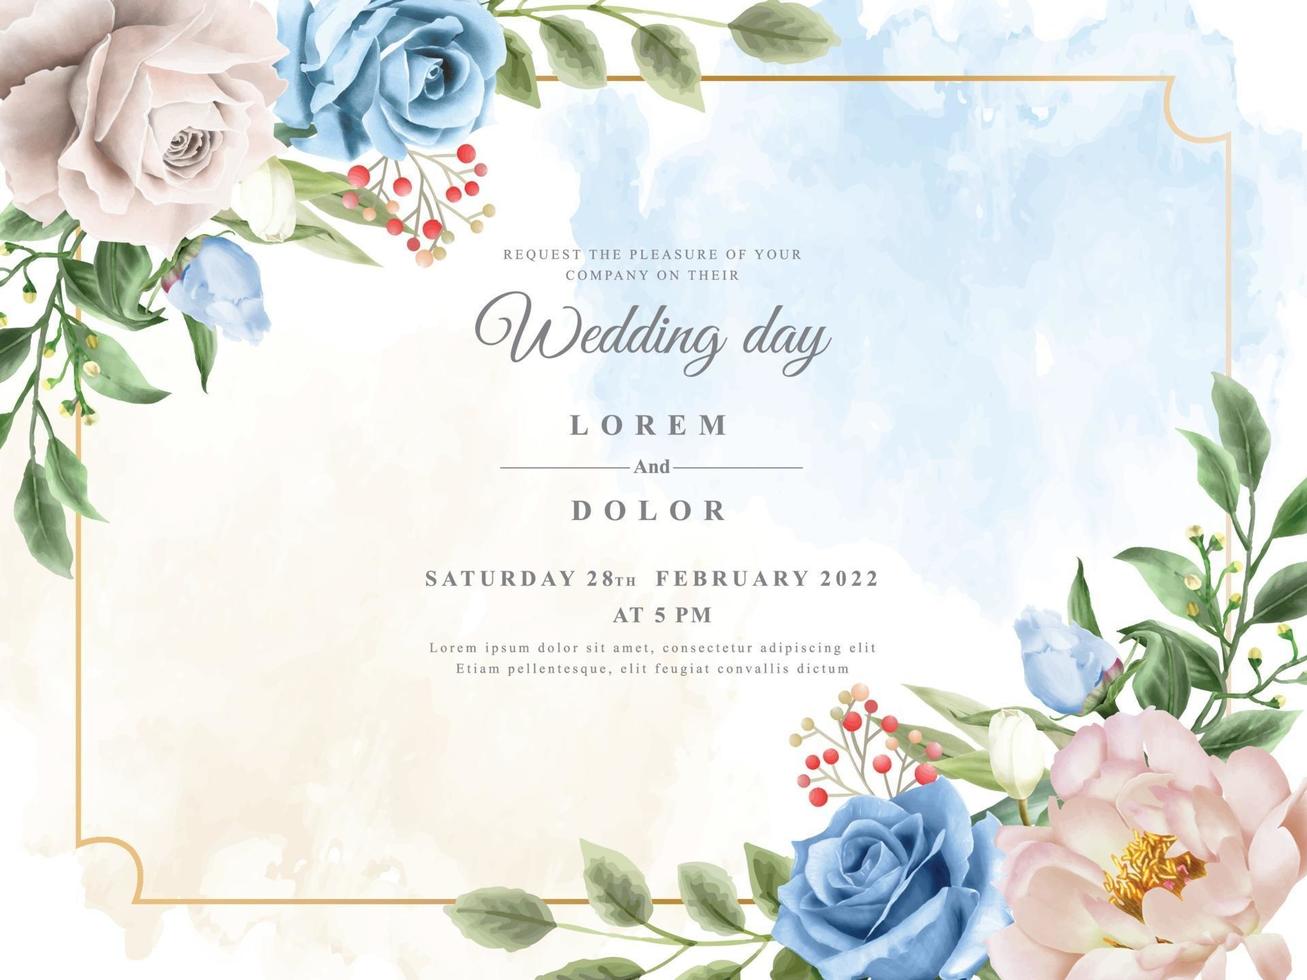 Wedding invitation with beautiful floral watercolor vector